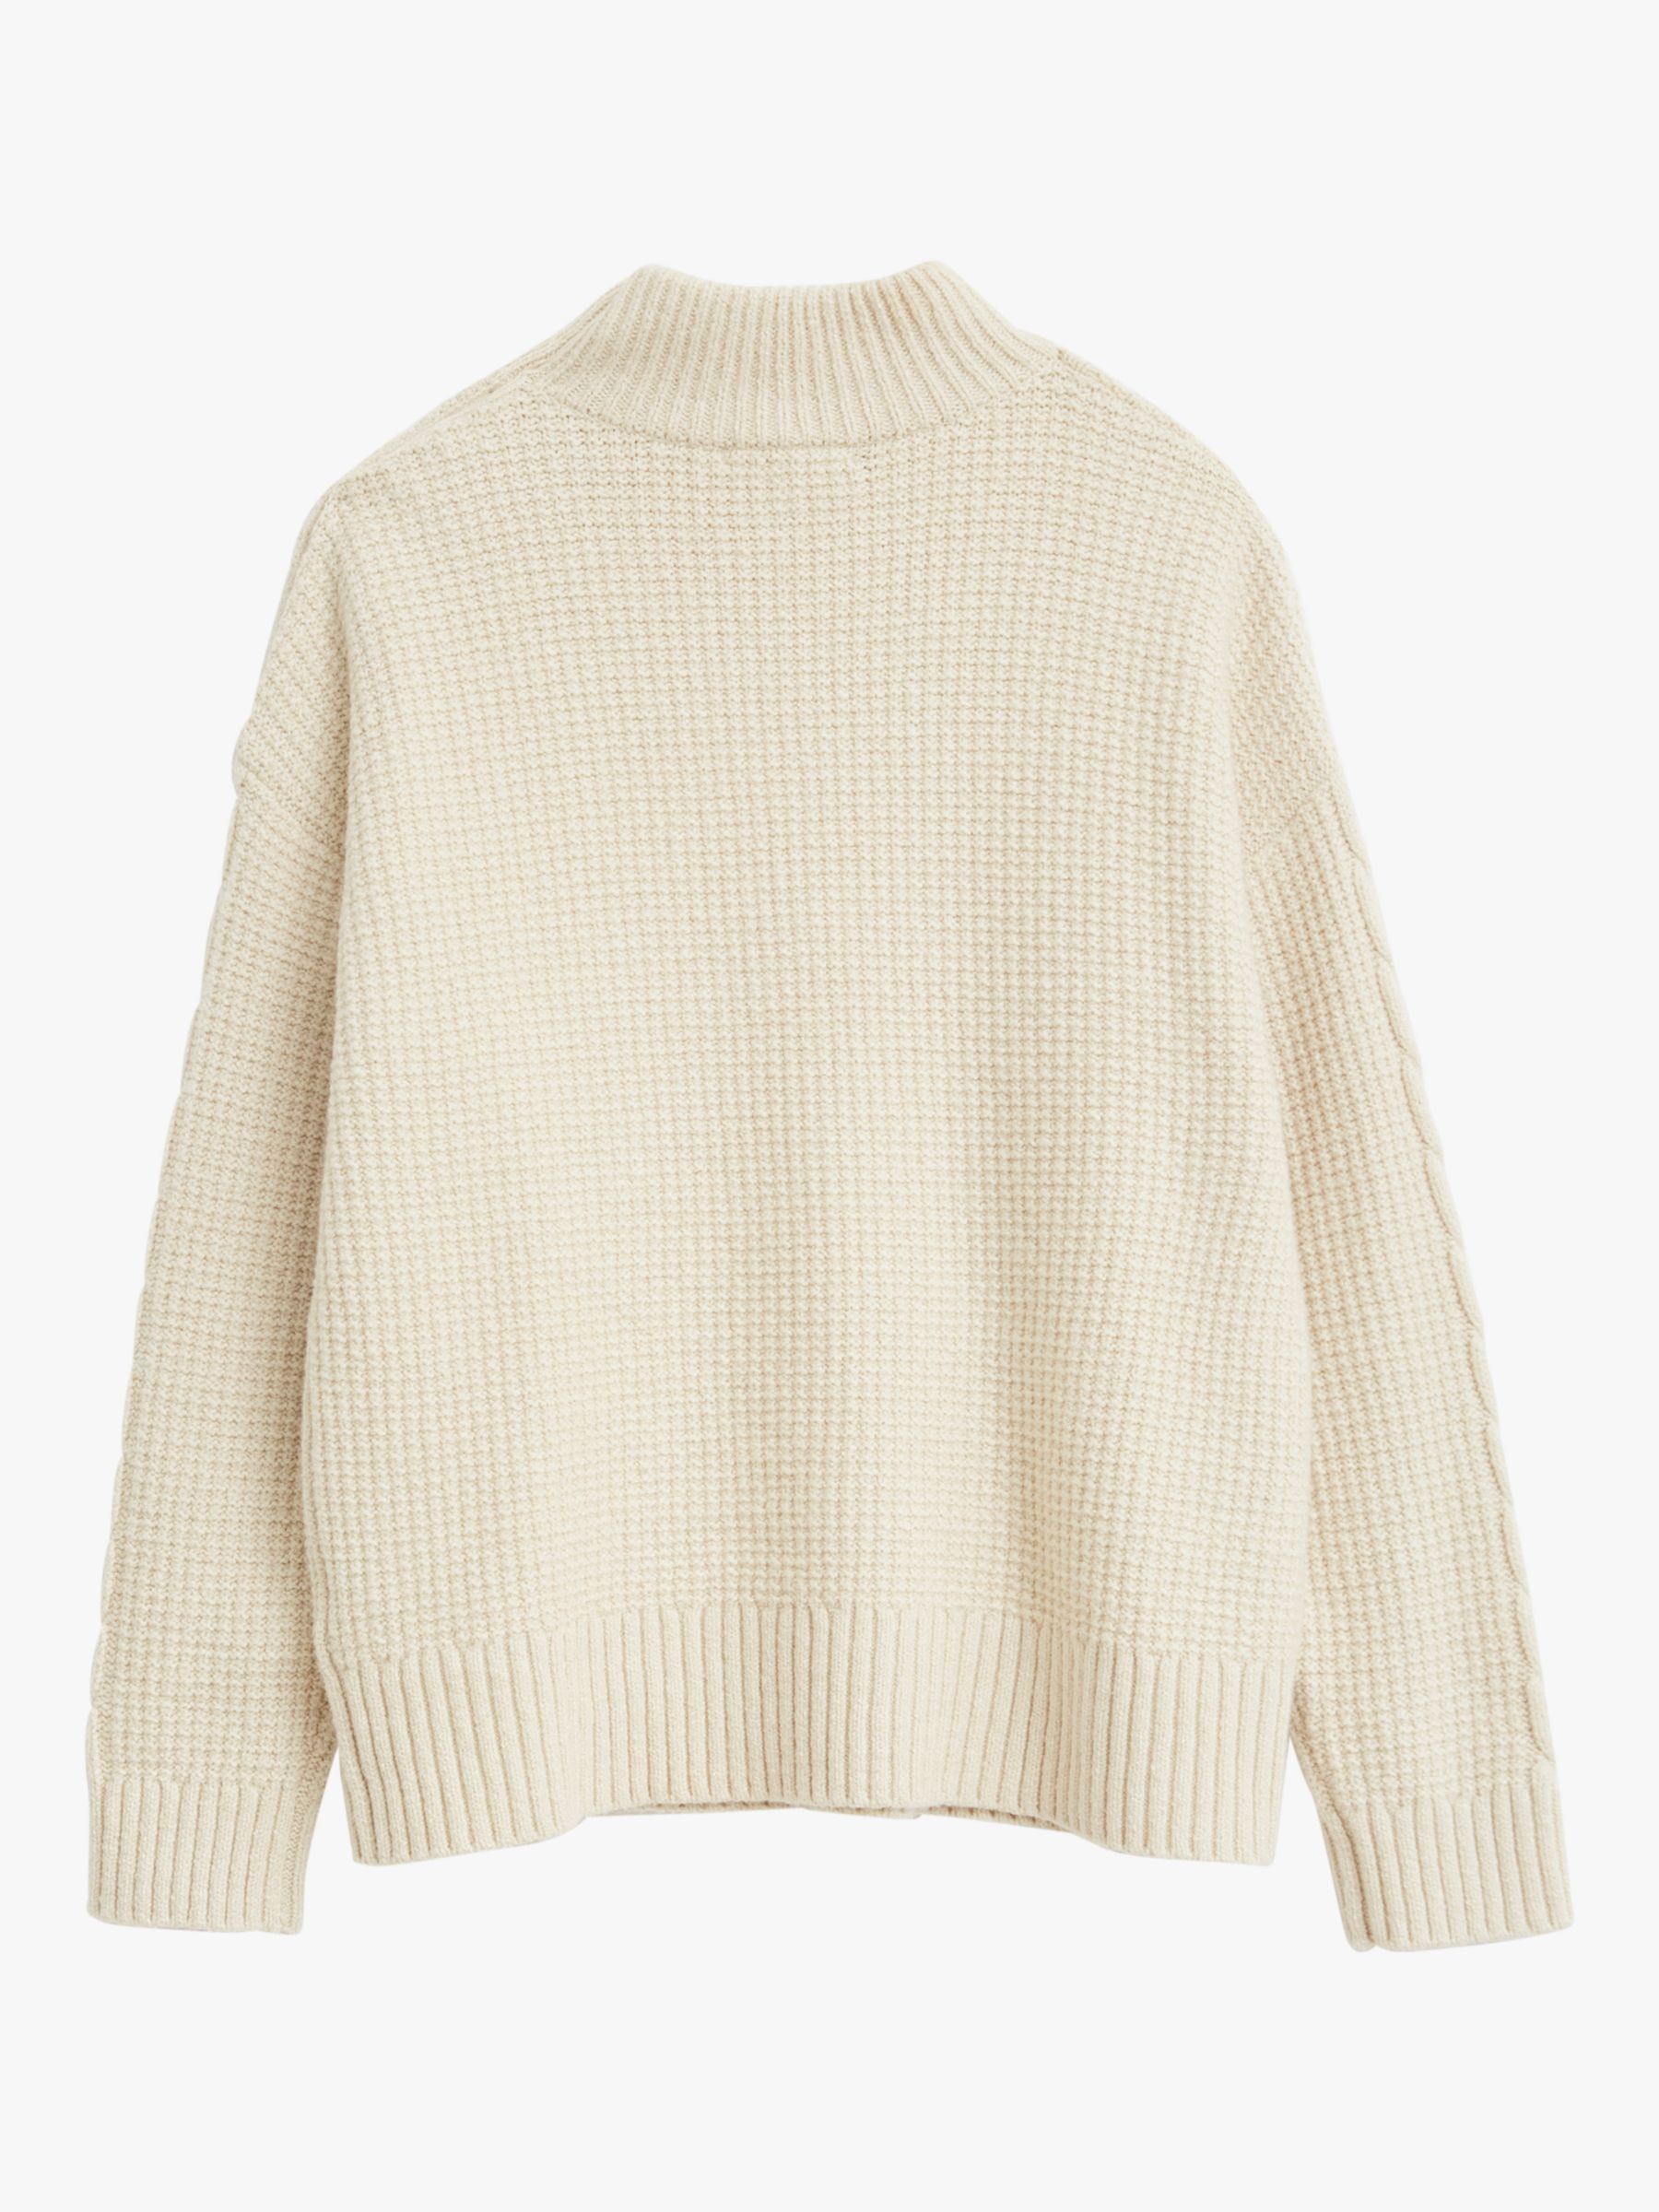 White Stuff Clary Cable Knit Jumper